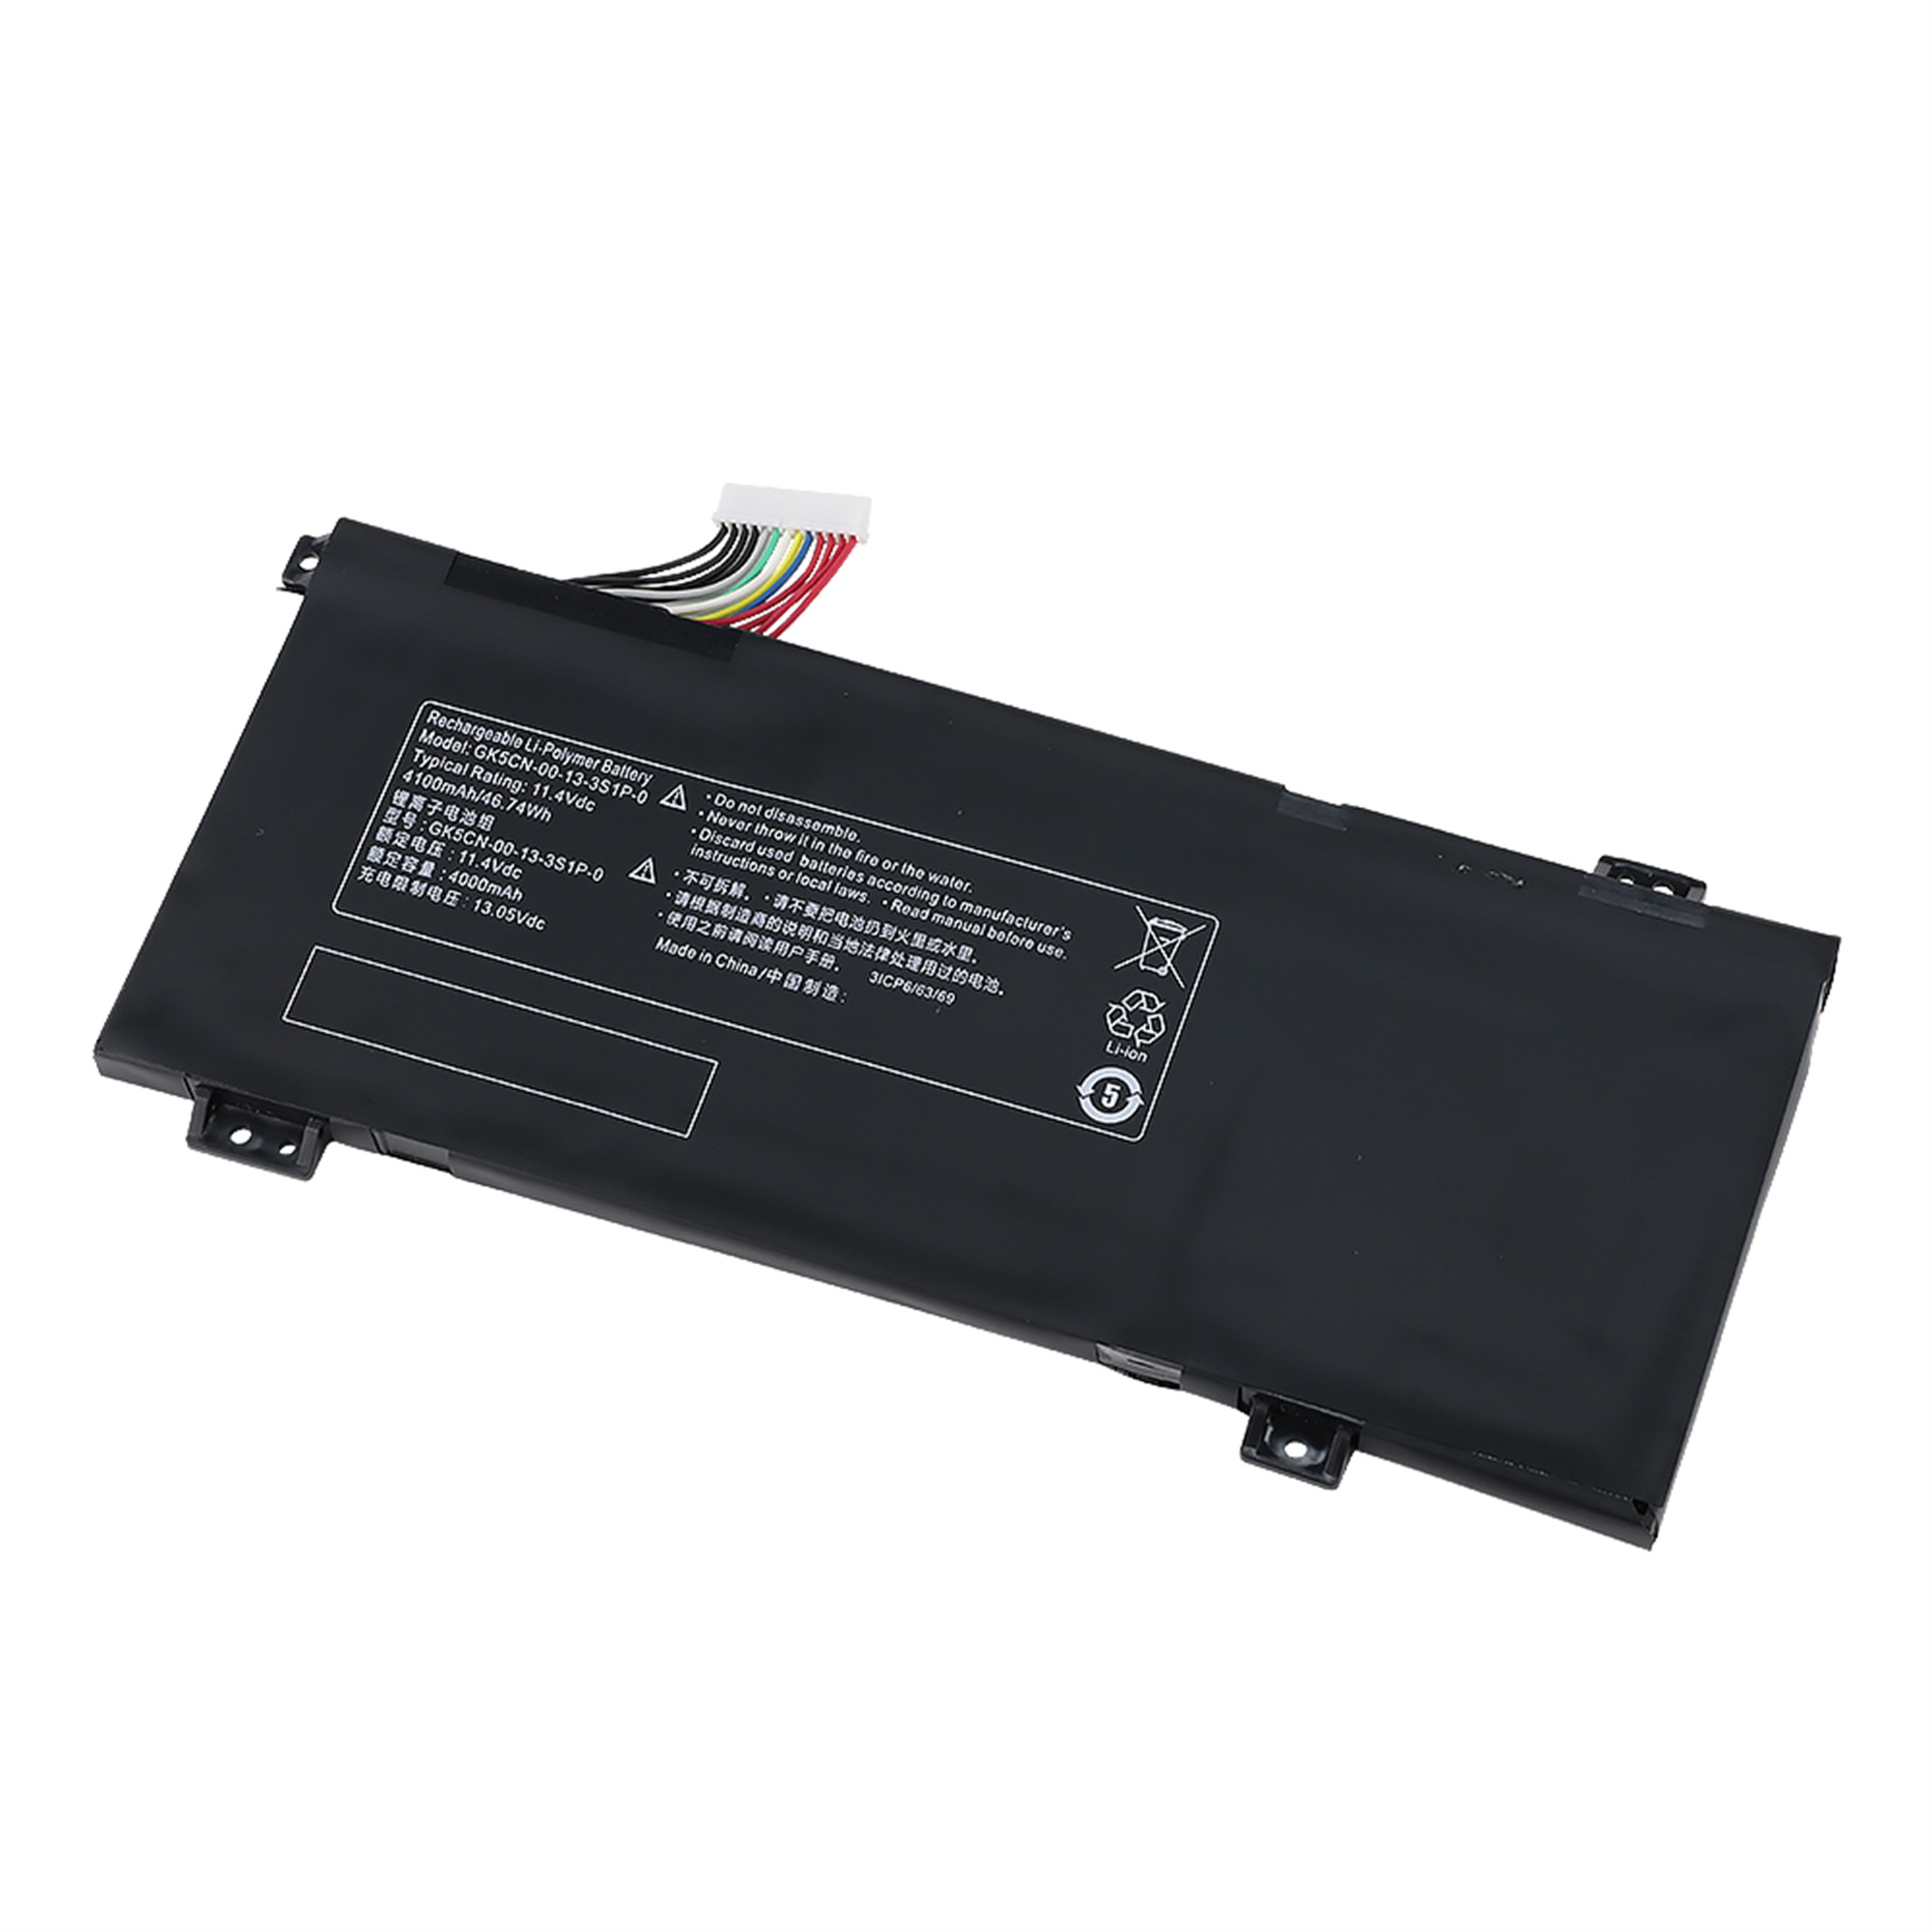 GK5CN-00-13-3S1P-0 rechargeable lithium ion Notebook battery Laptop battery 11.4V 4100MAH